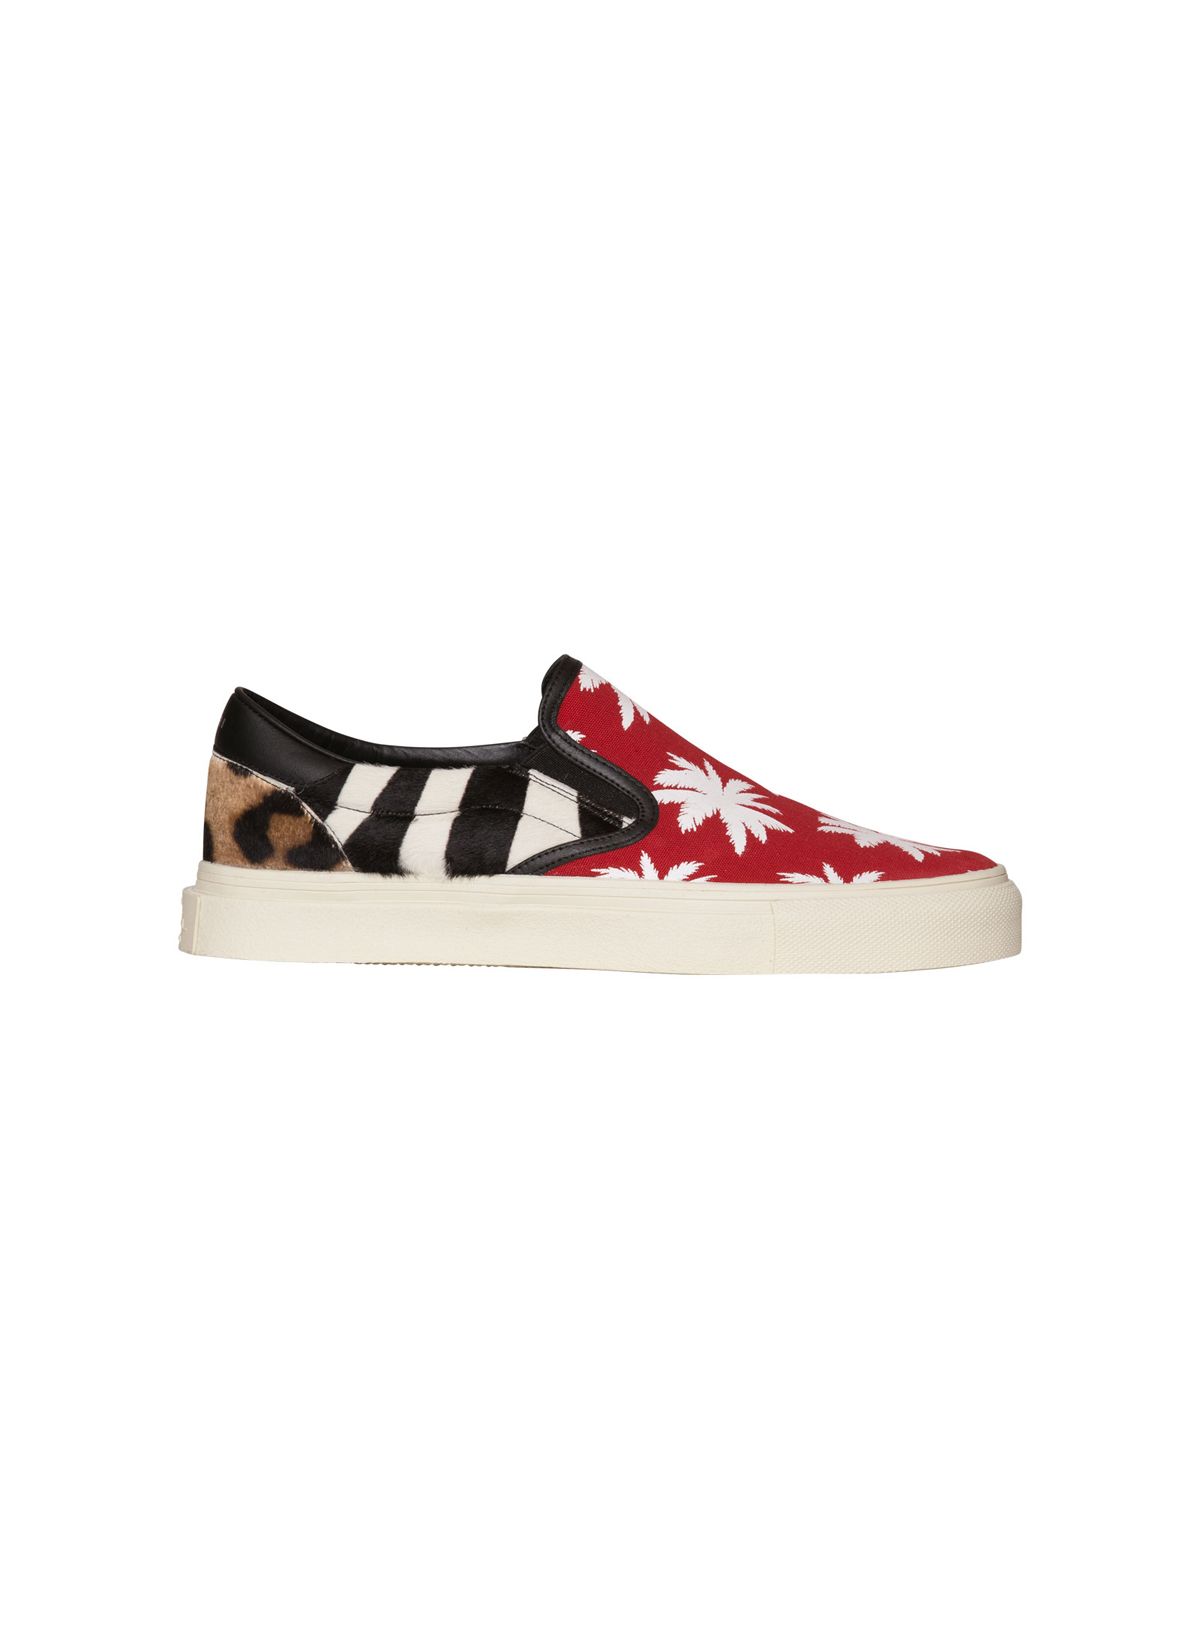 AMIRI AMIRI SNEAKERS WITHOUT LACES WITH PRINT IN MULTICOLOR,10855951